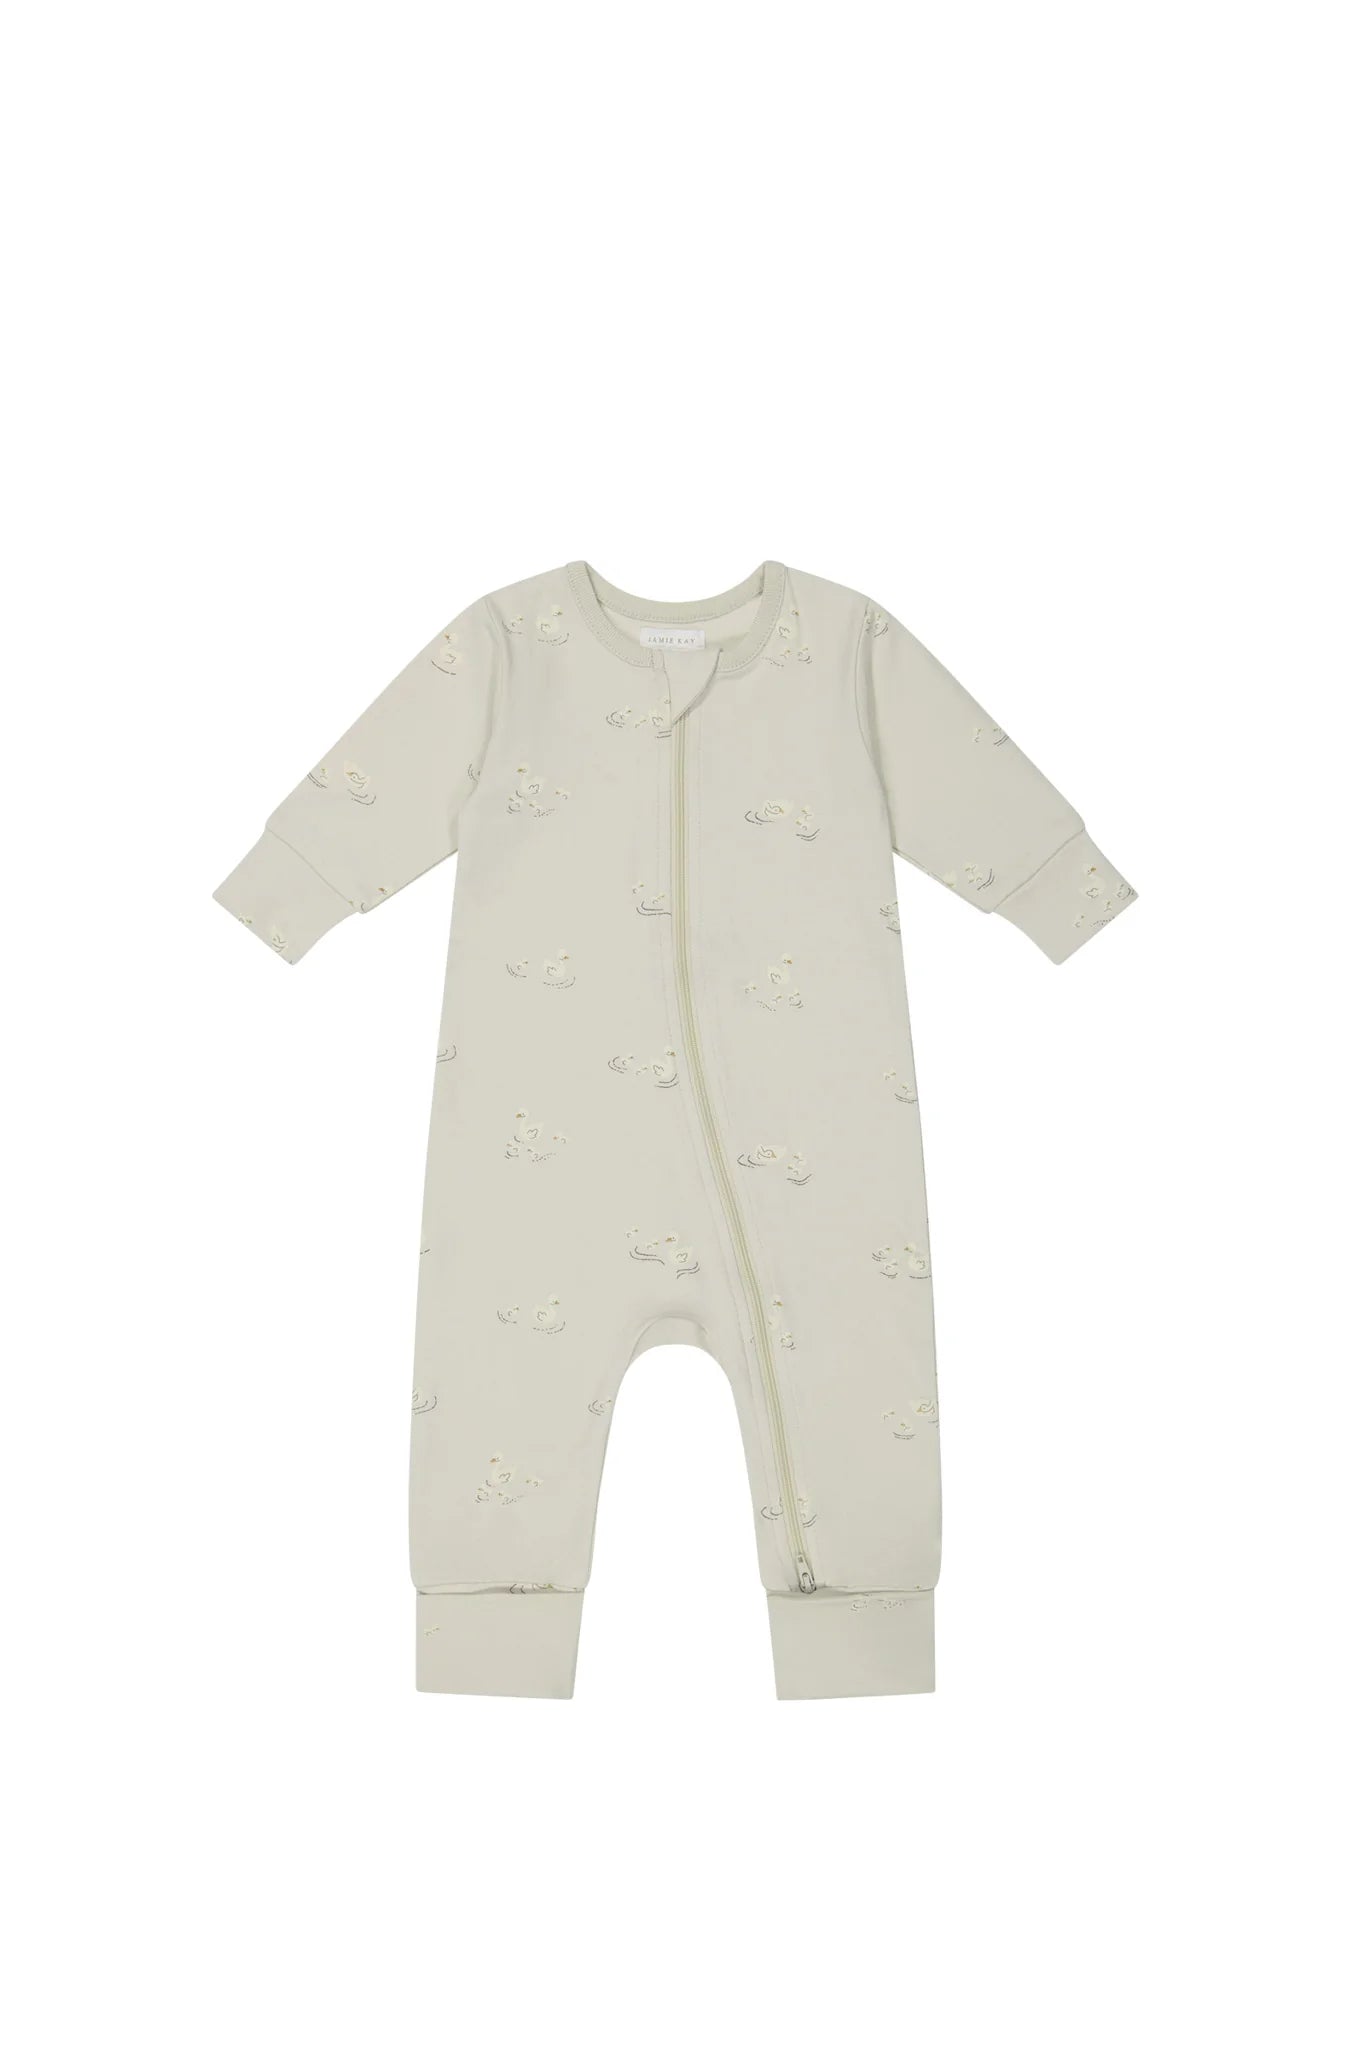 Jamie Kay - Organic Cotton Gracelyn Onepiece (Ducks in a Row Seed Silver Lining)